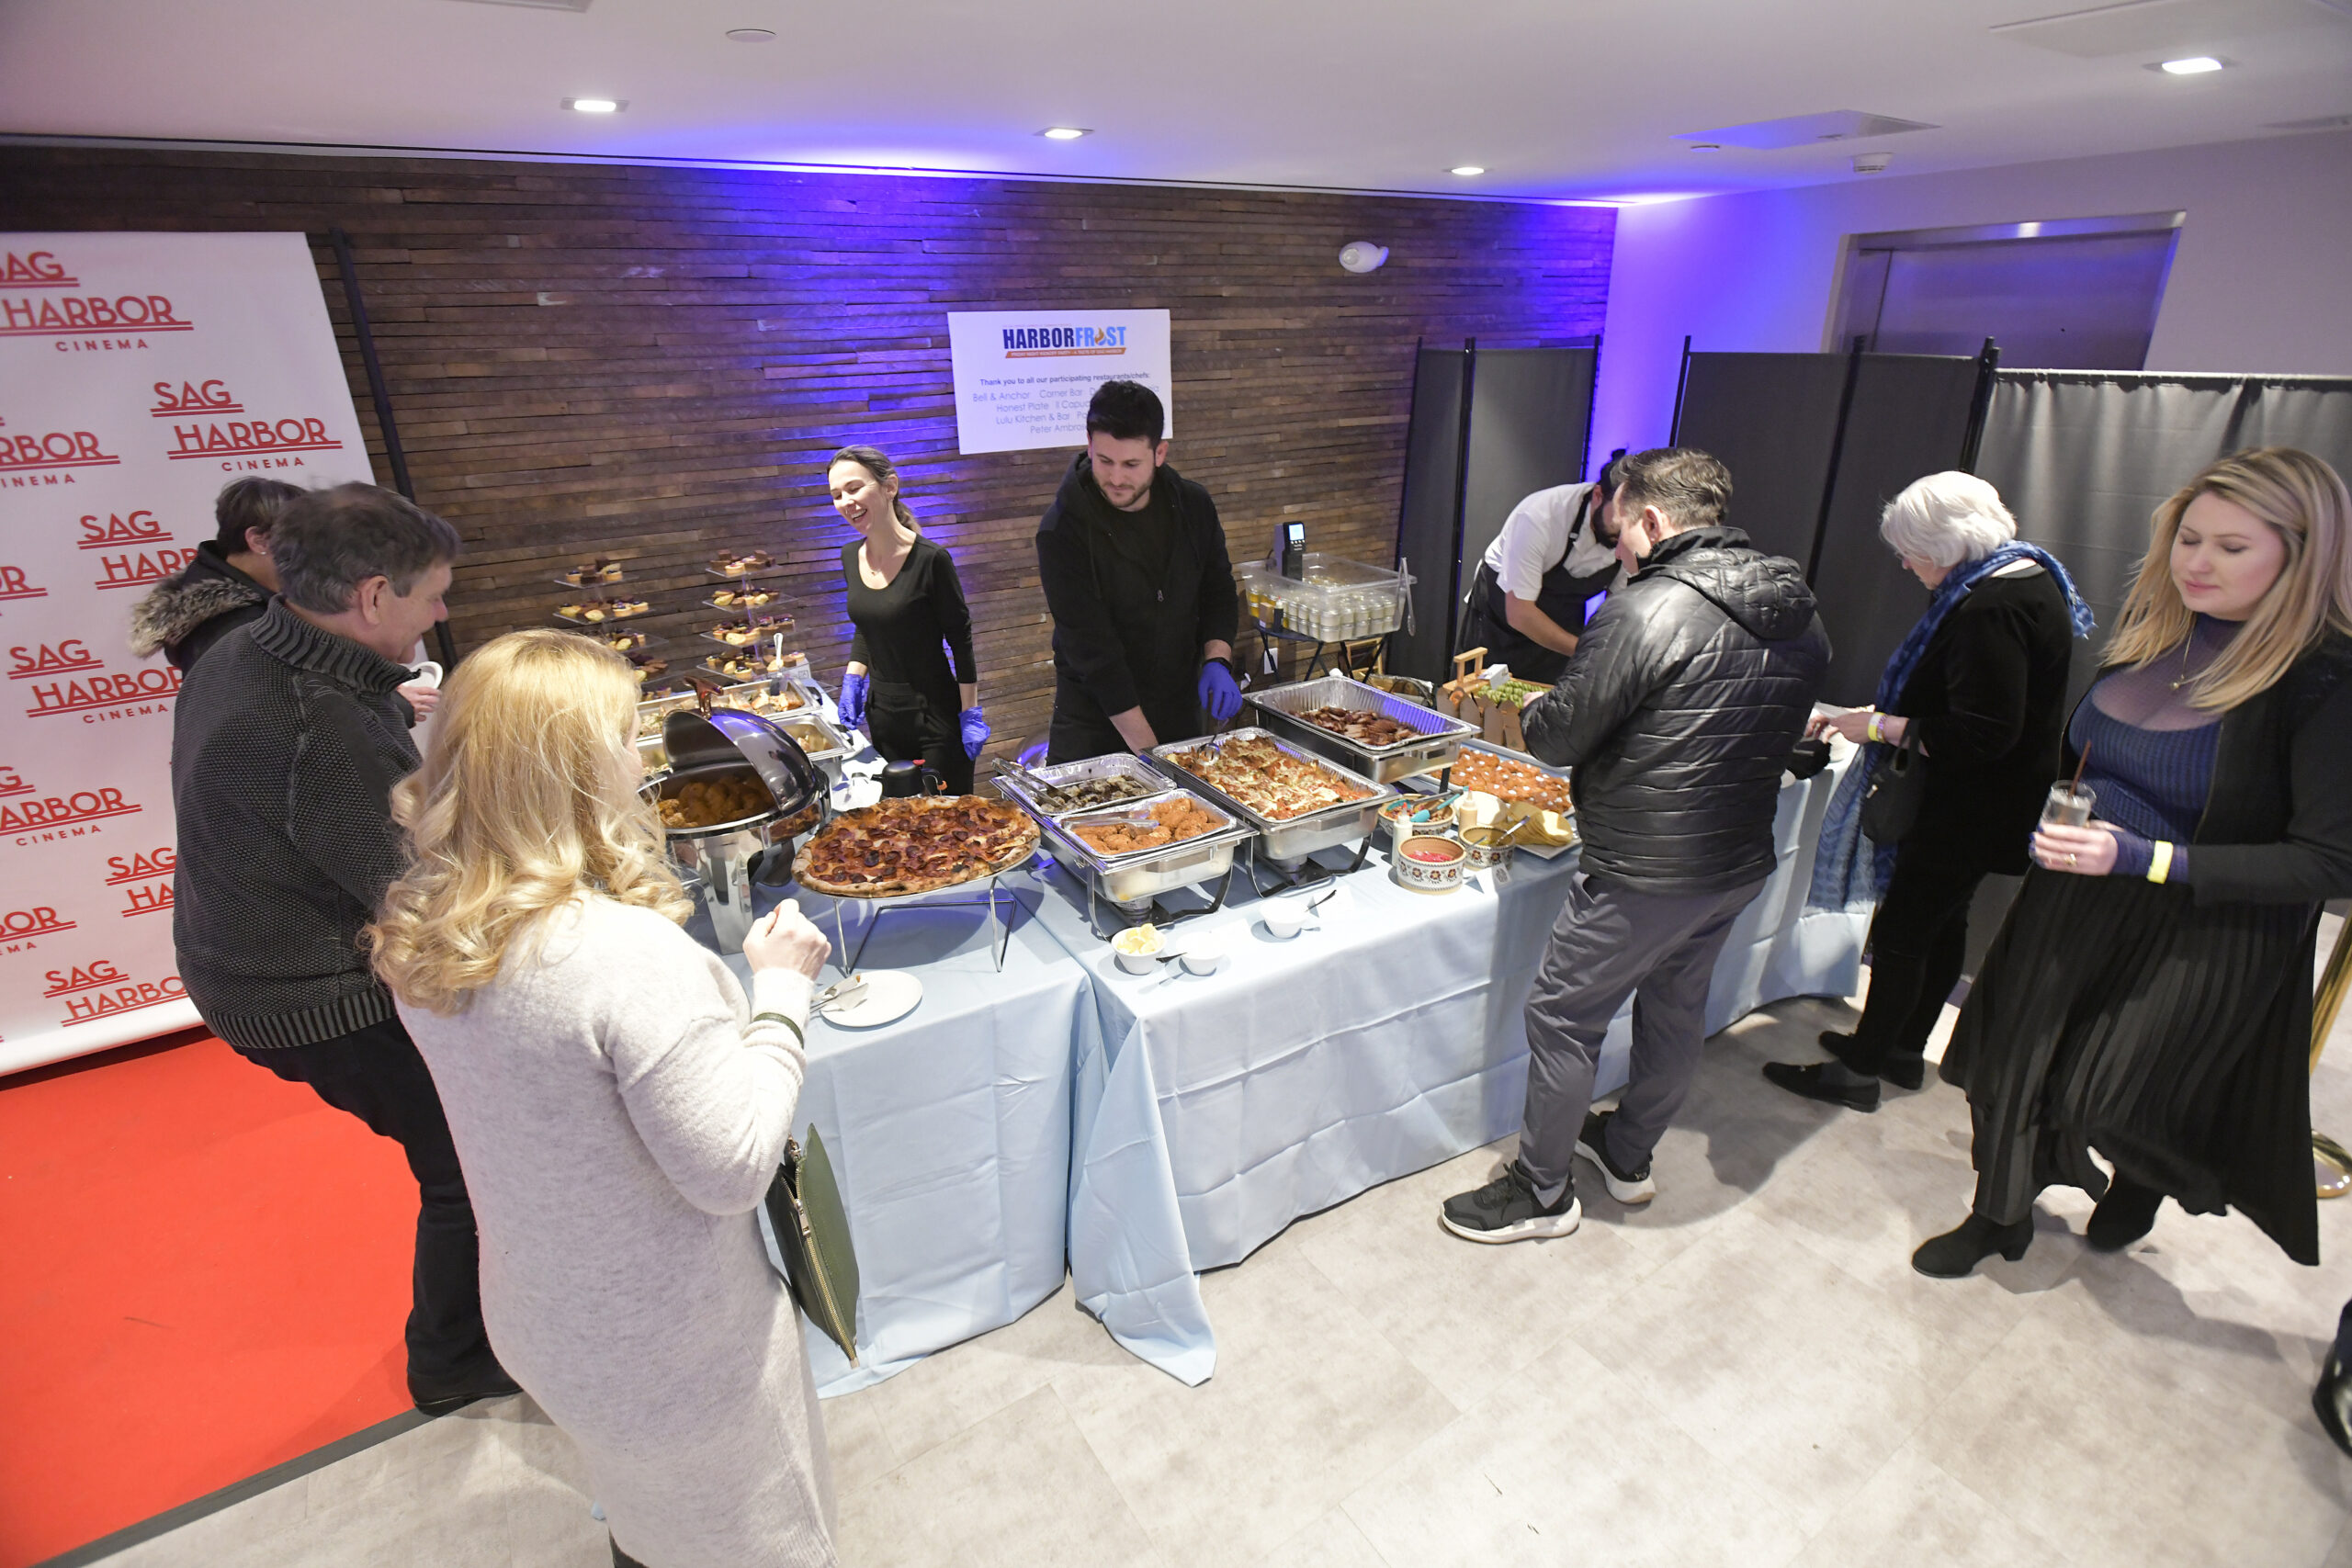 Folks sample the fare at the HarborFrost kickoff party, 